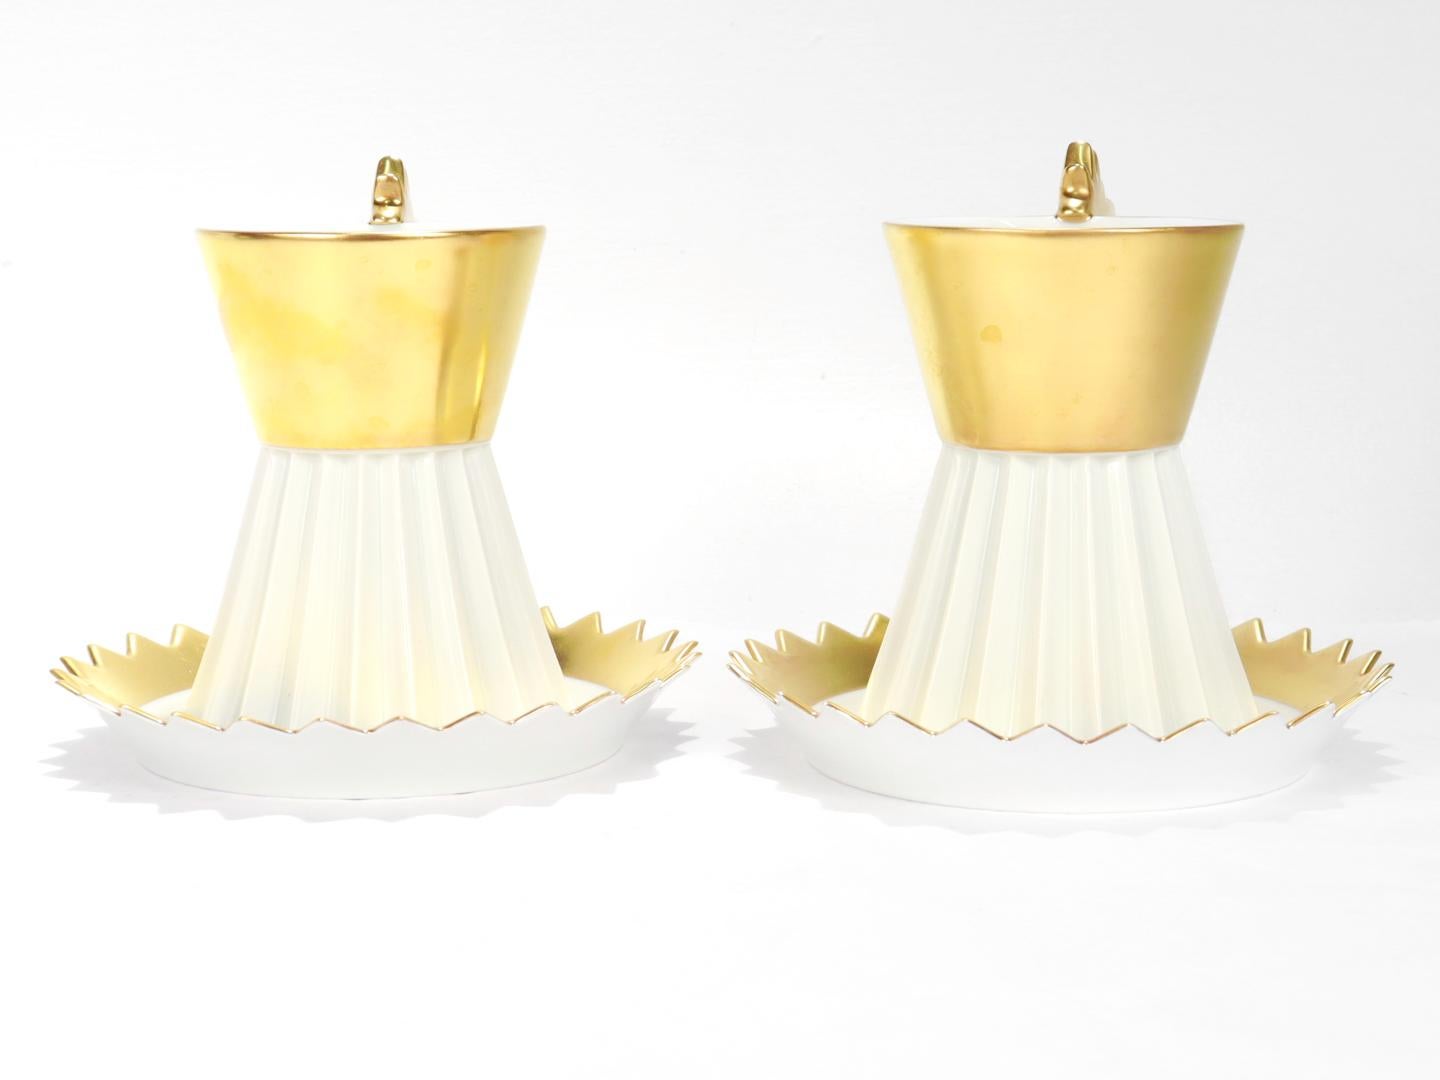 German Pair of Rosenthal Studio Linie Gilt Porcelain No. 23 Cup & Saucers by Otto Piene For Sale